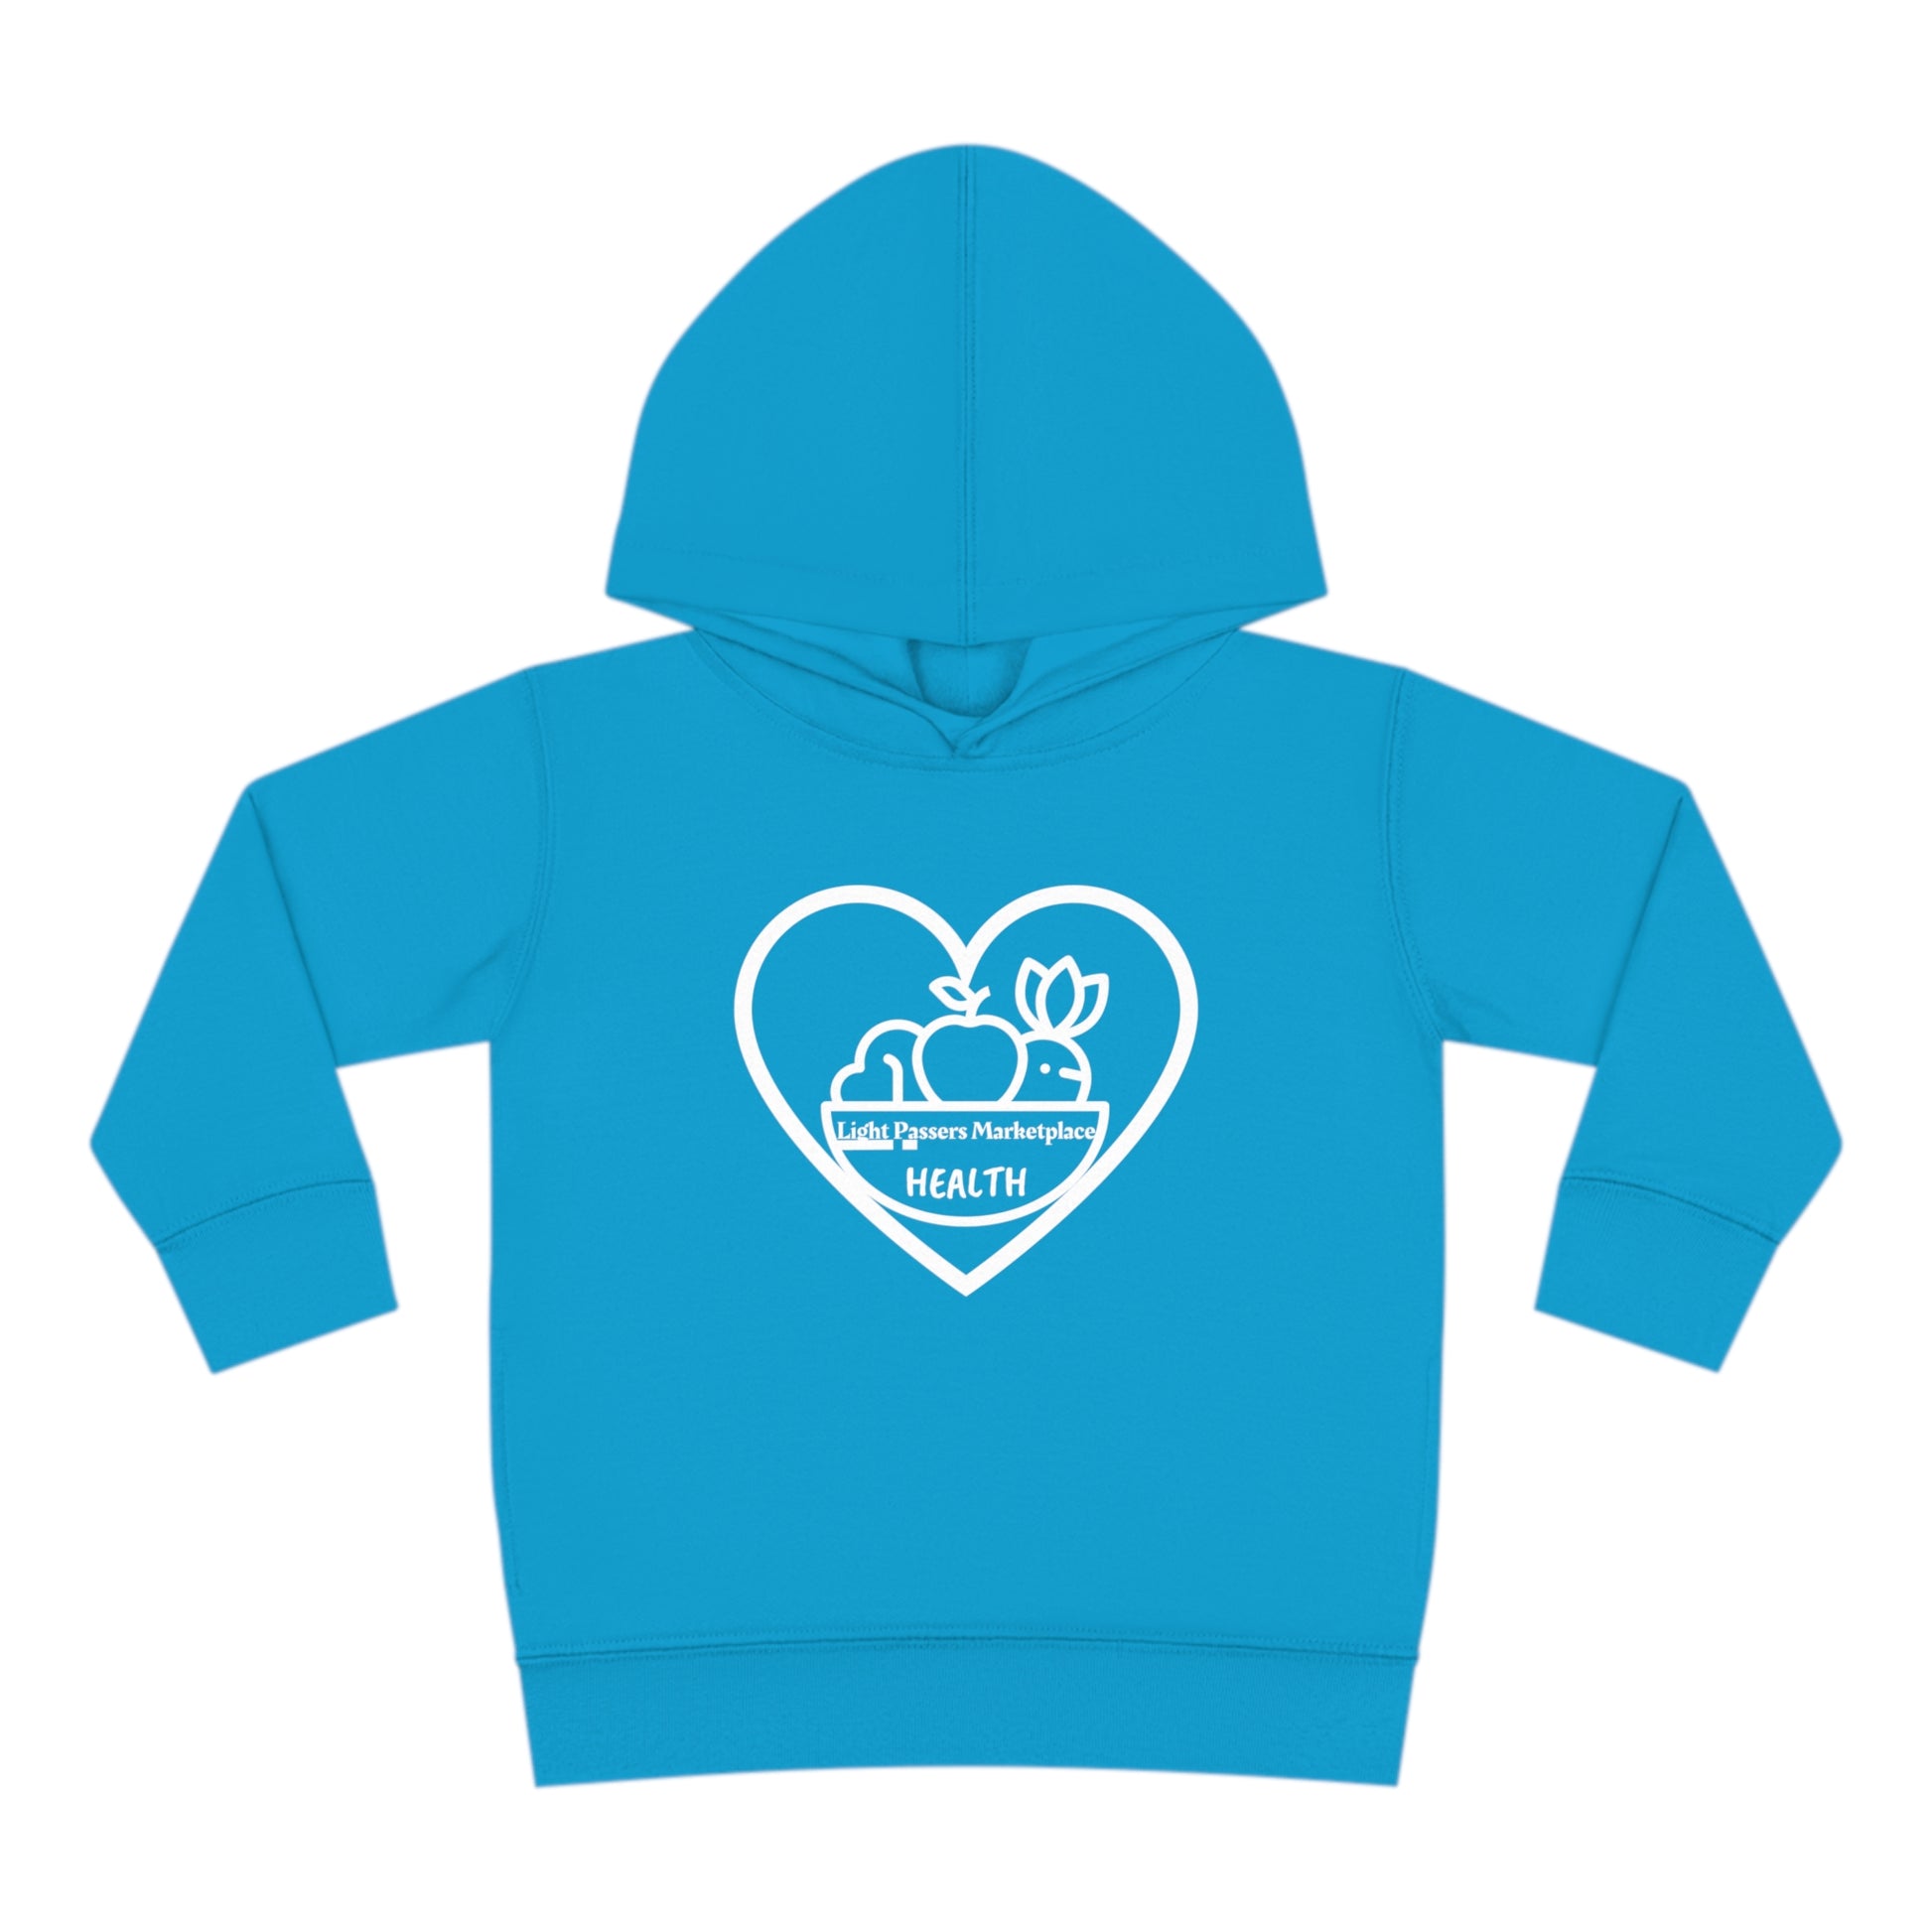 A toddler hoodie featuring a heart and apple logo, designed for comfort with jersey-lined hood, cover-stitched details, side seam pockets, and durable fabric blend of cotton and polyester.